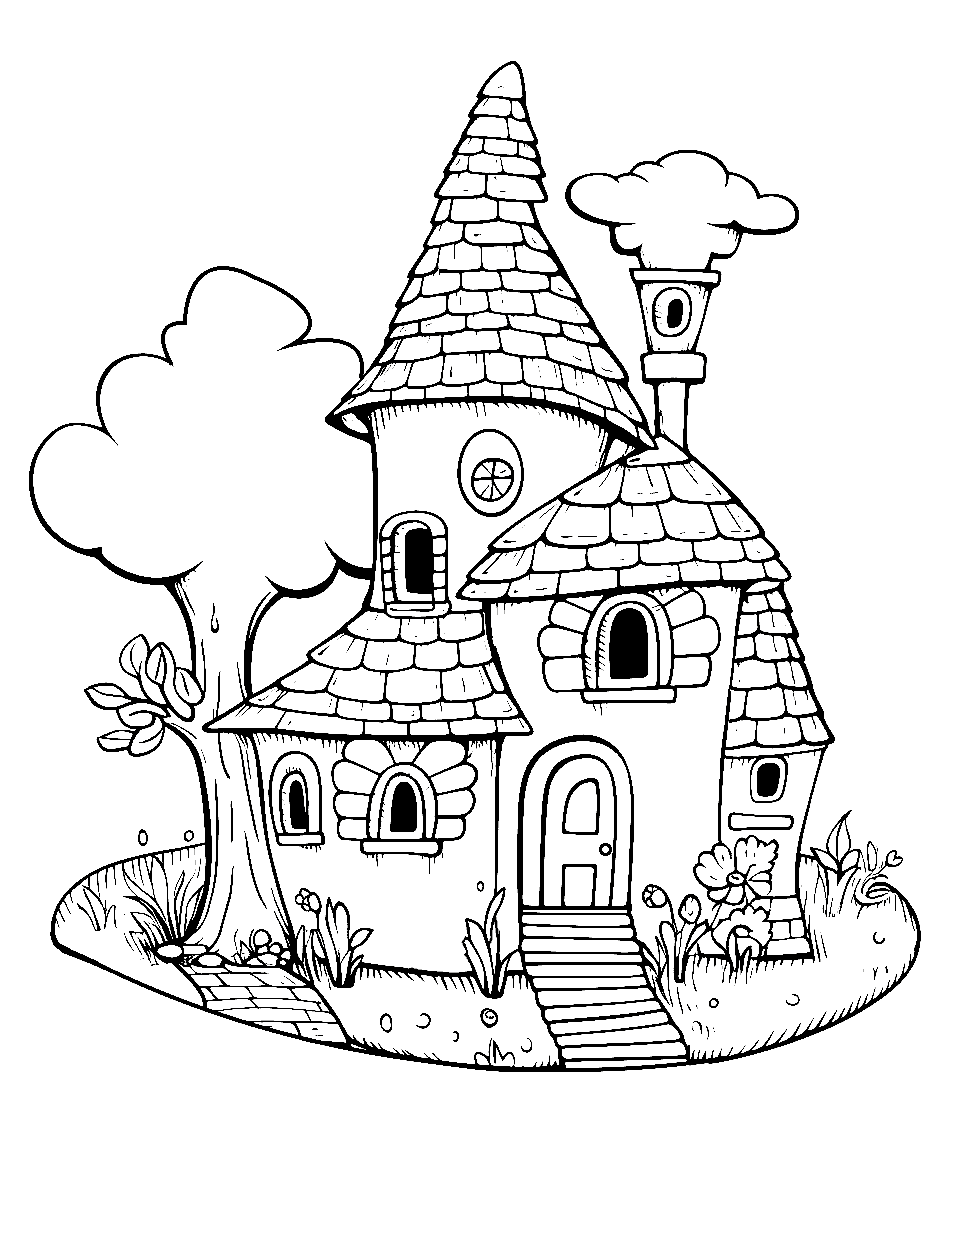 Surreal Dream Home Coloring Page - A whimsical house in a lush, dreamy landscape.